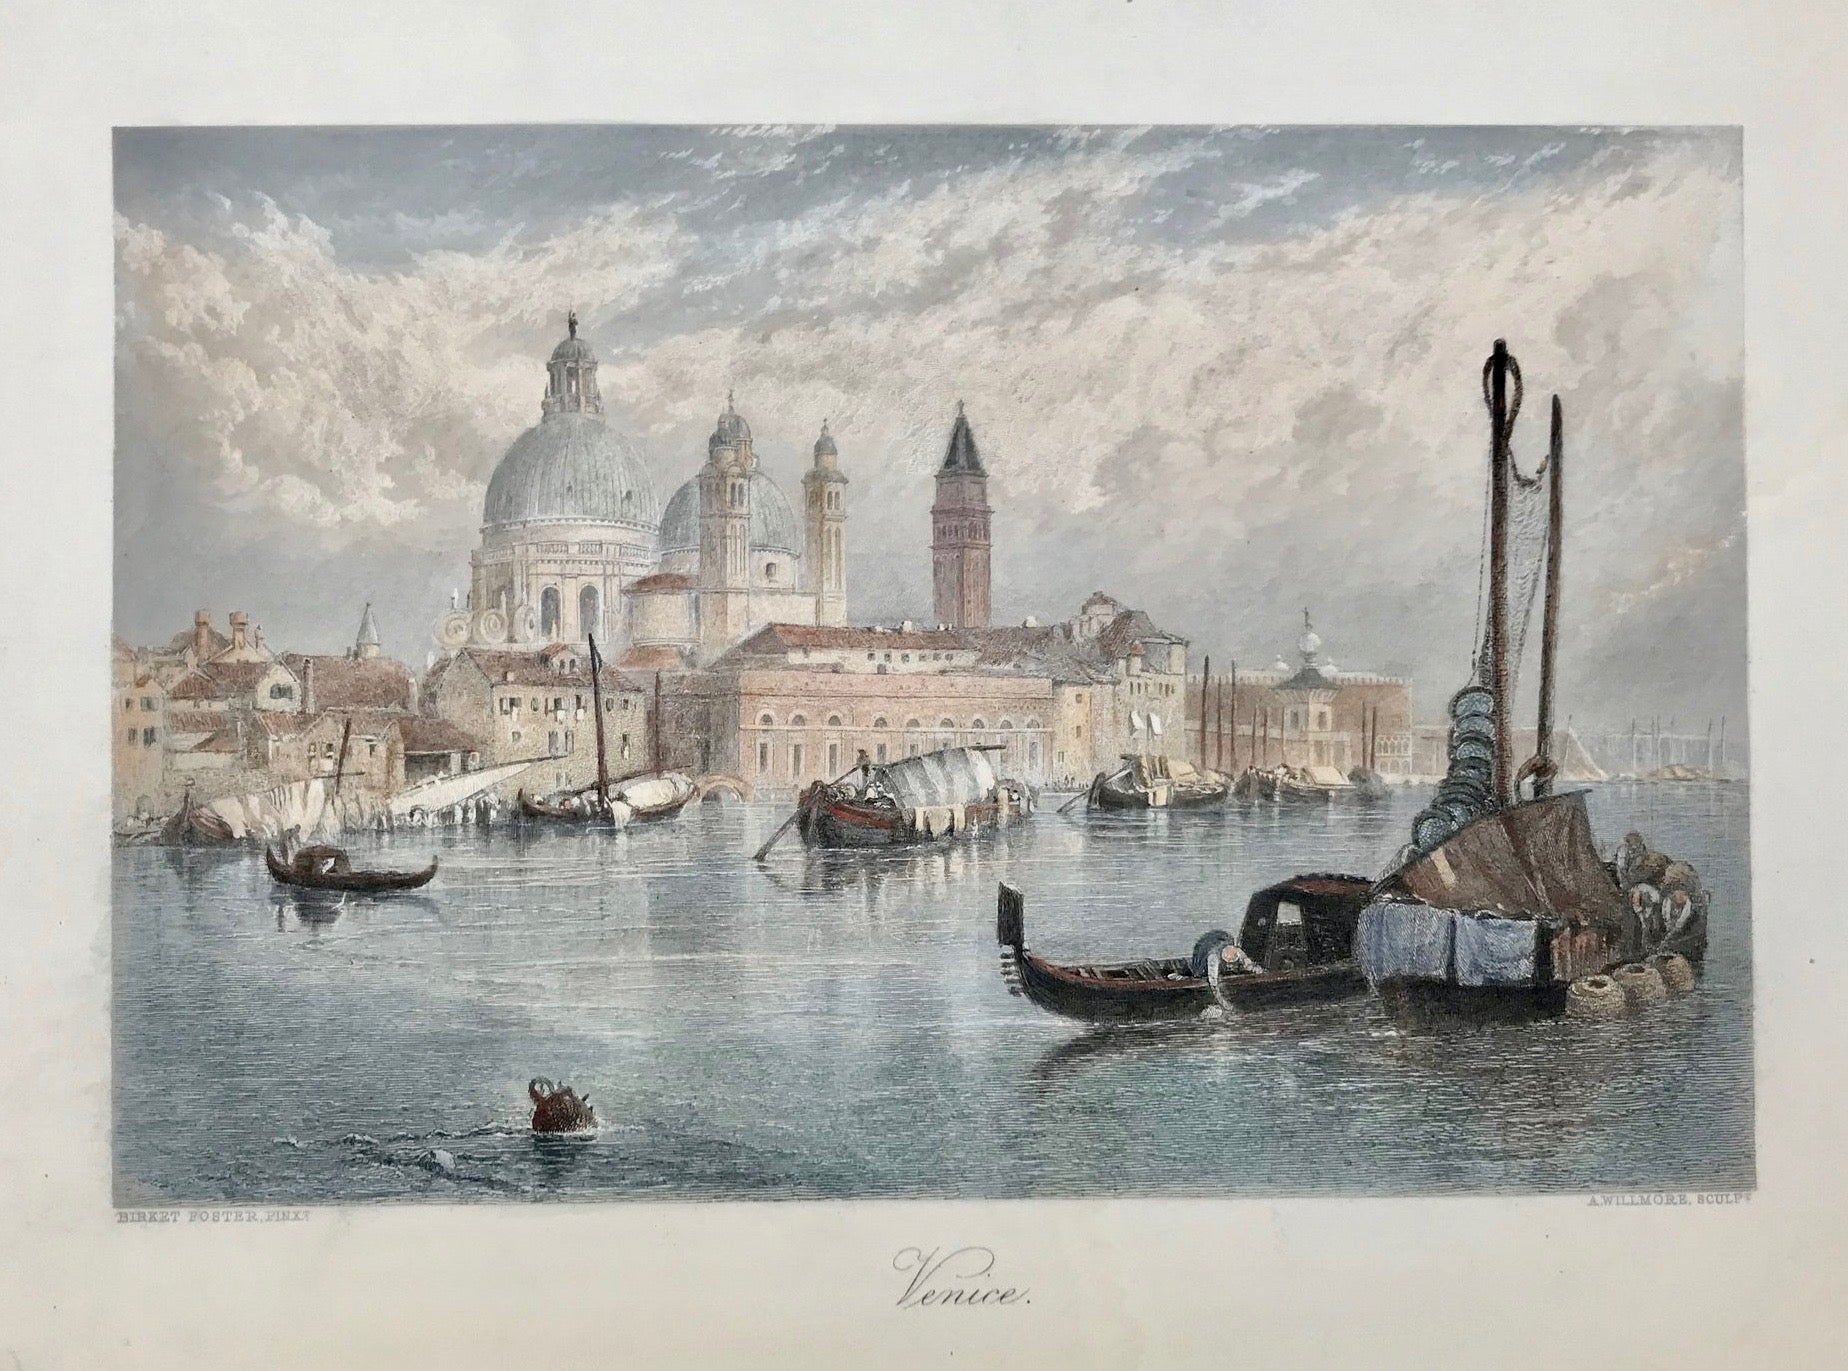 Venice  Steel engraving by A. Willmore after a painting by Birket Foster, ca 1850.  Very attractive hand coloring.